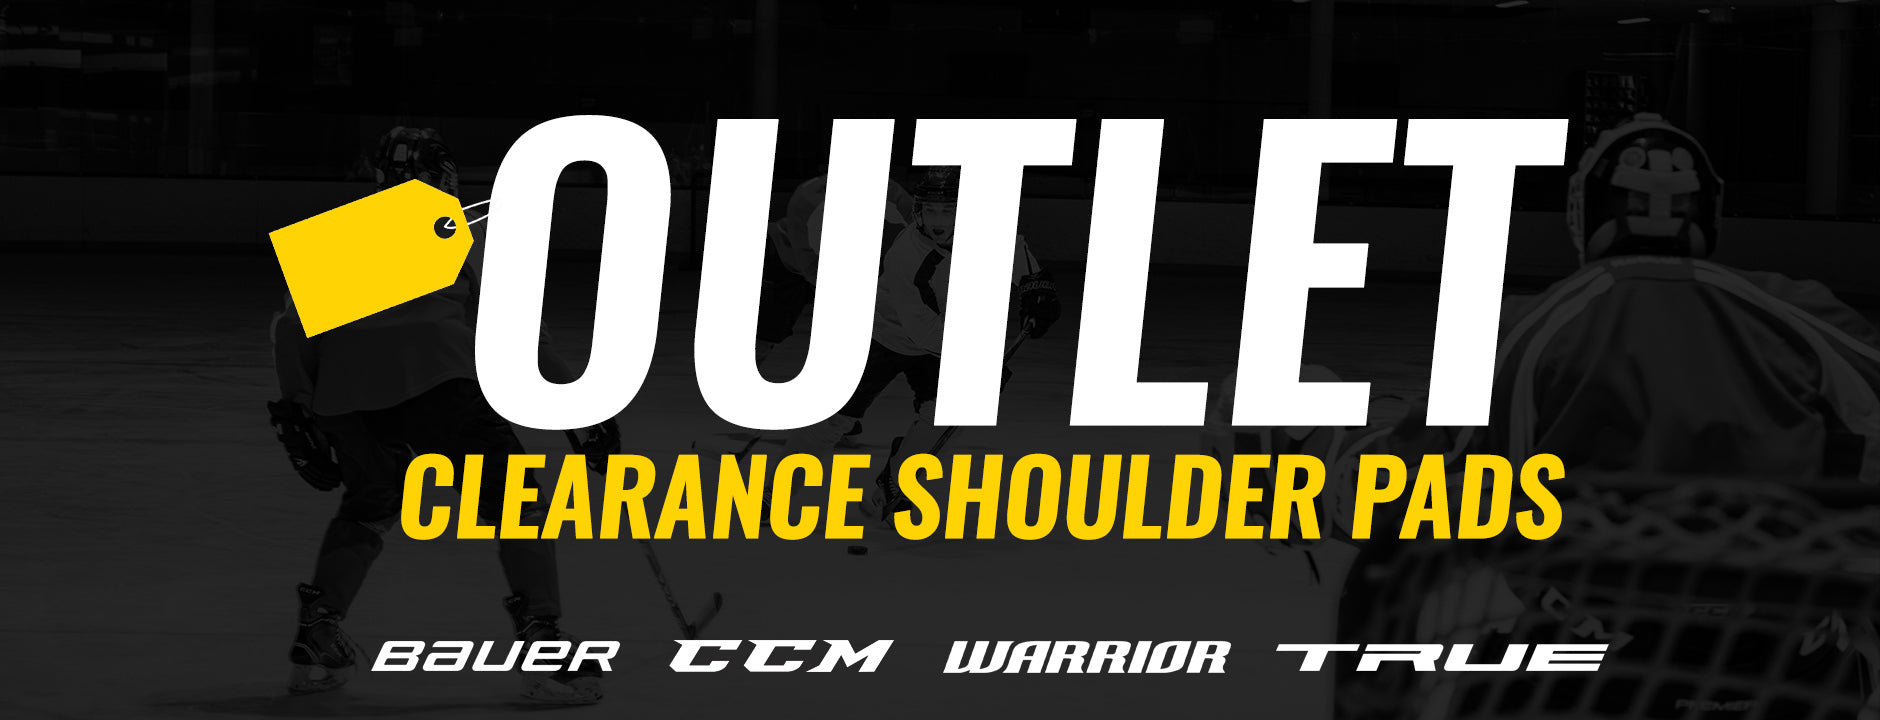 Clearance Shoulder Pads